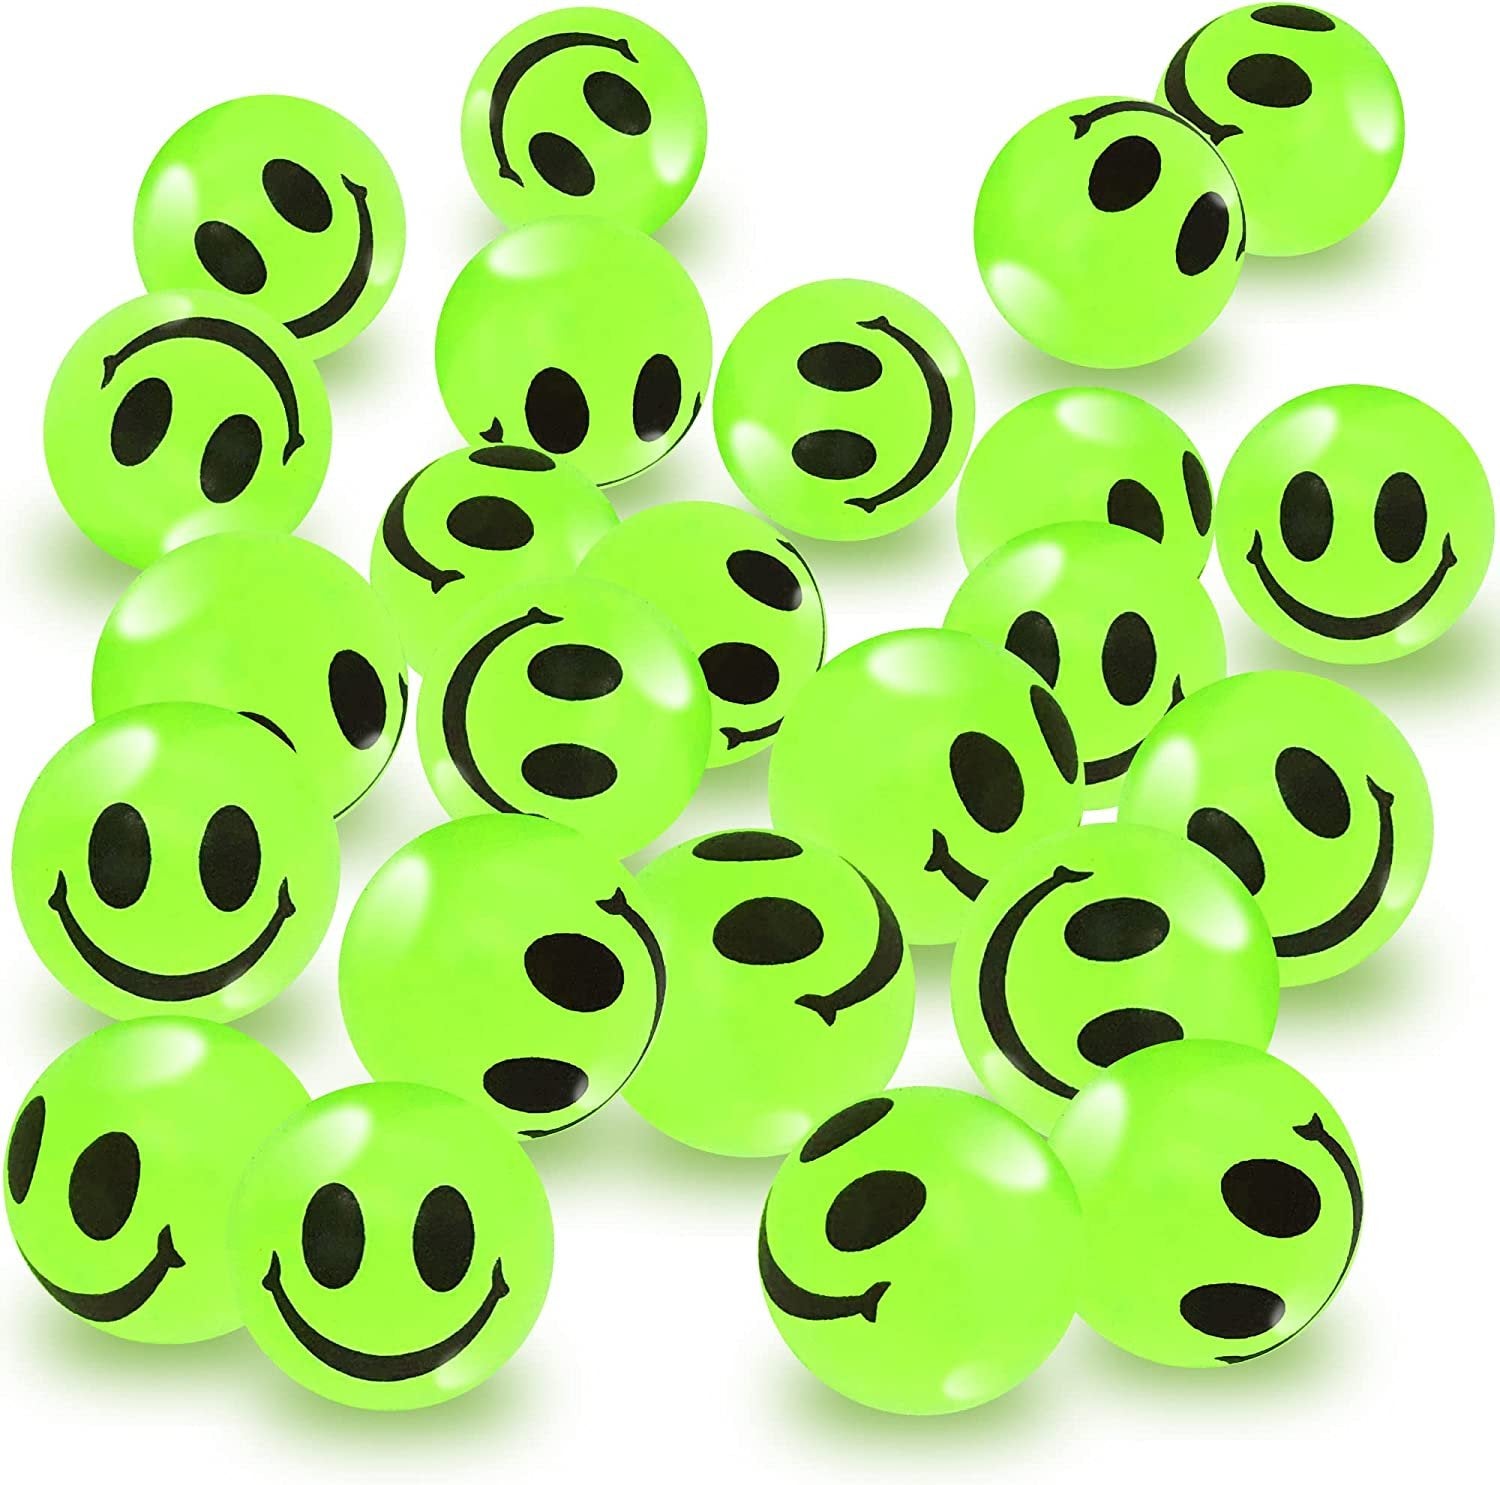 Pink Glow in The Dark Smile Face Bouncing Balls - Bulk Pack of 36 - 1" High-Bounce Bouncy Balls for Kids, Glowing Party Favors and Goodie Bag Fillers for Boys and Girls